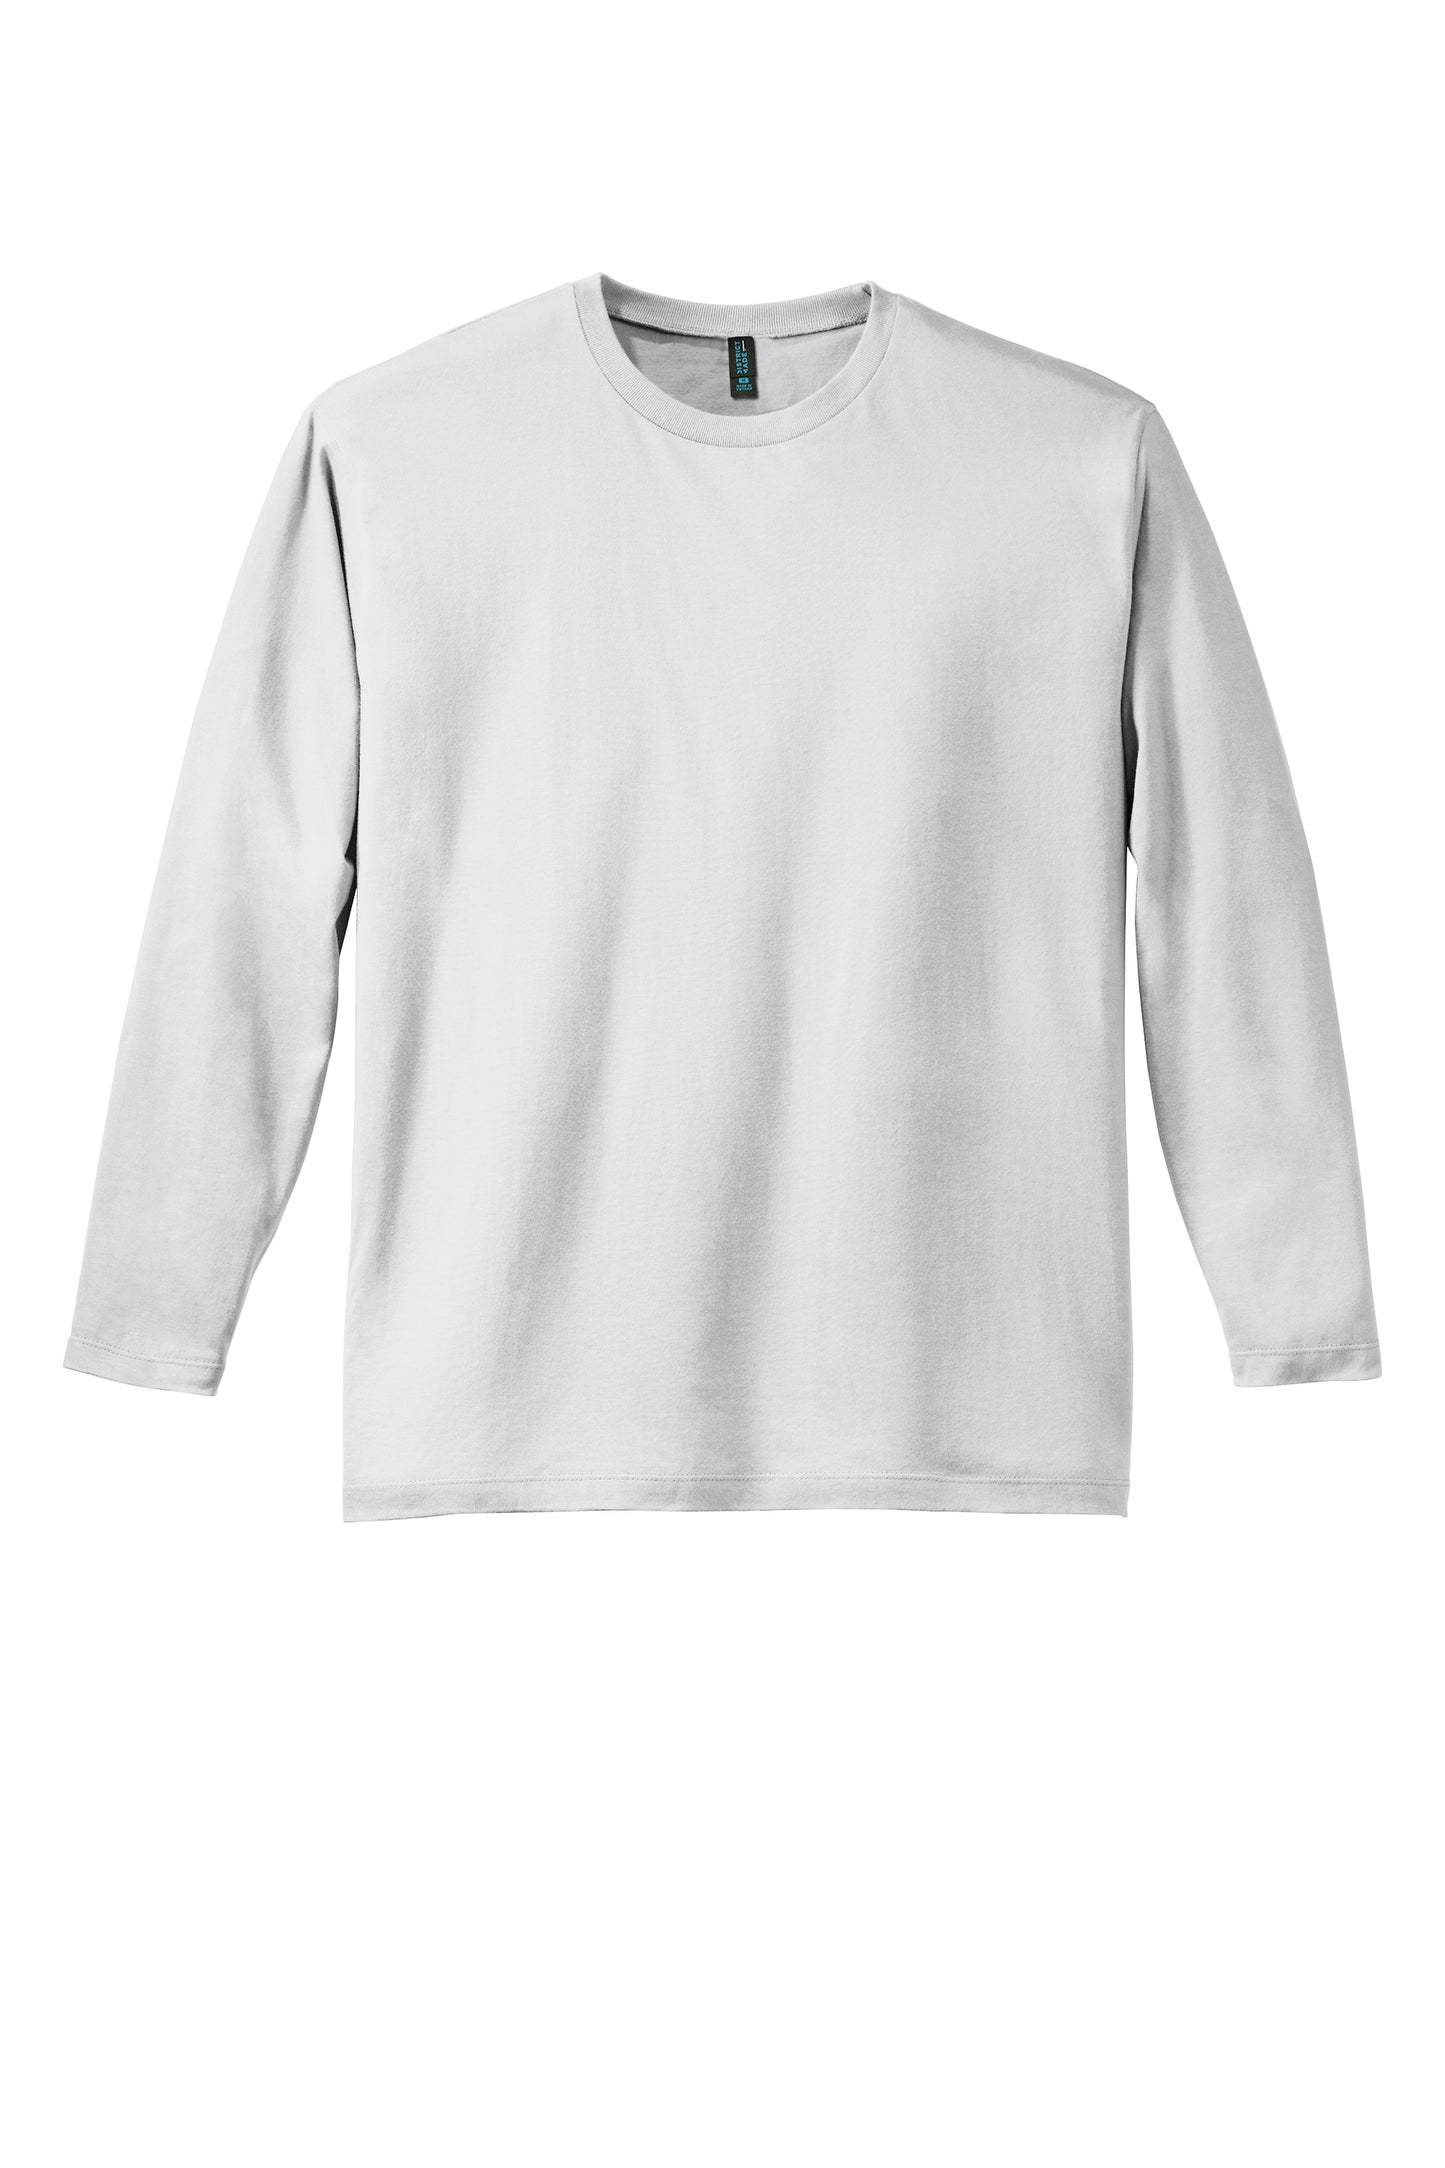 District Perfect Weight Long Sleeve Unisex Tee - Bright White